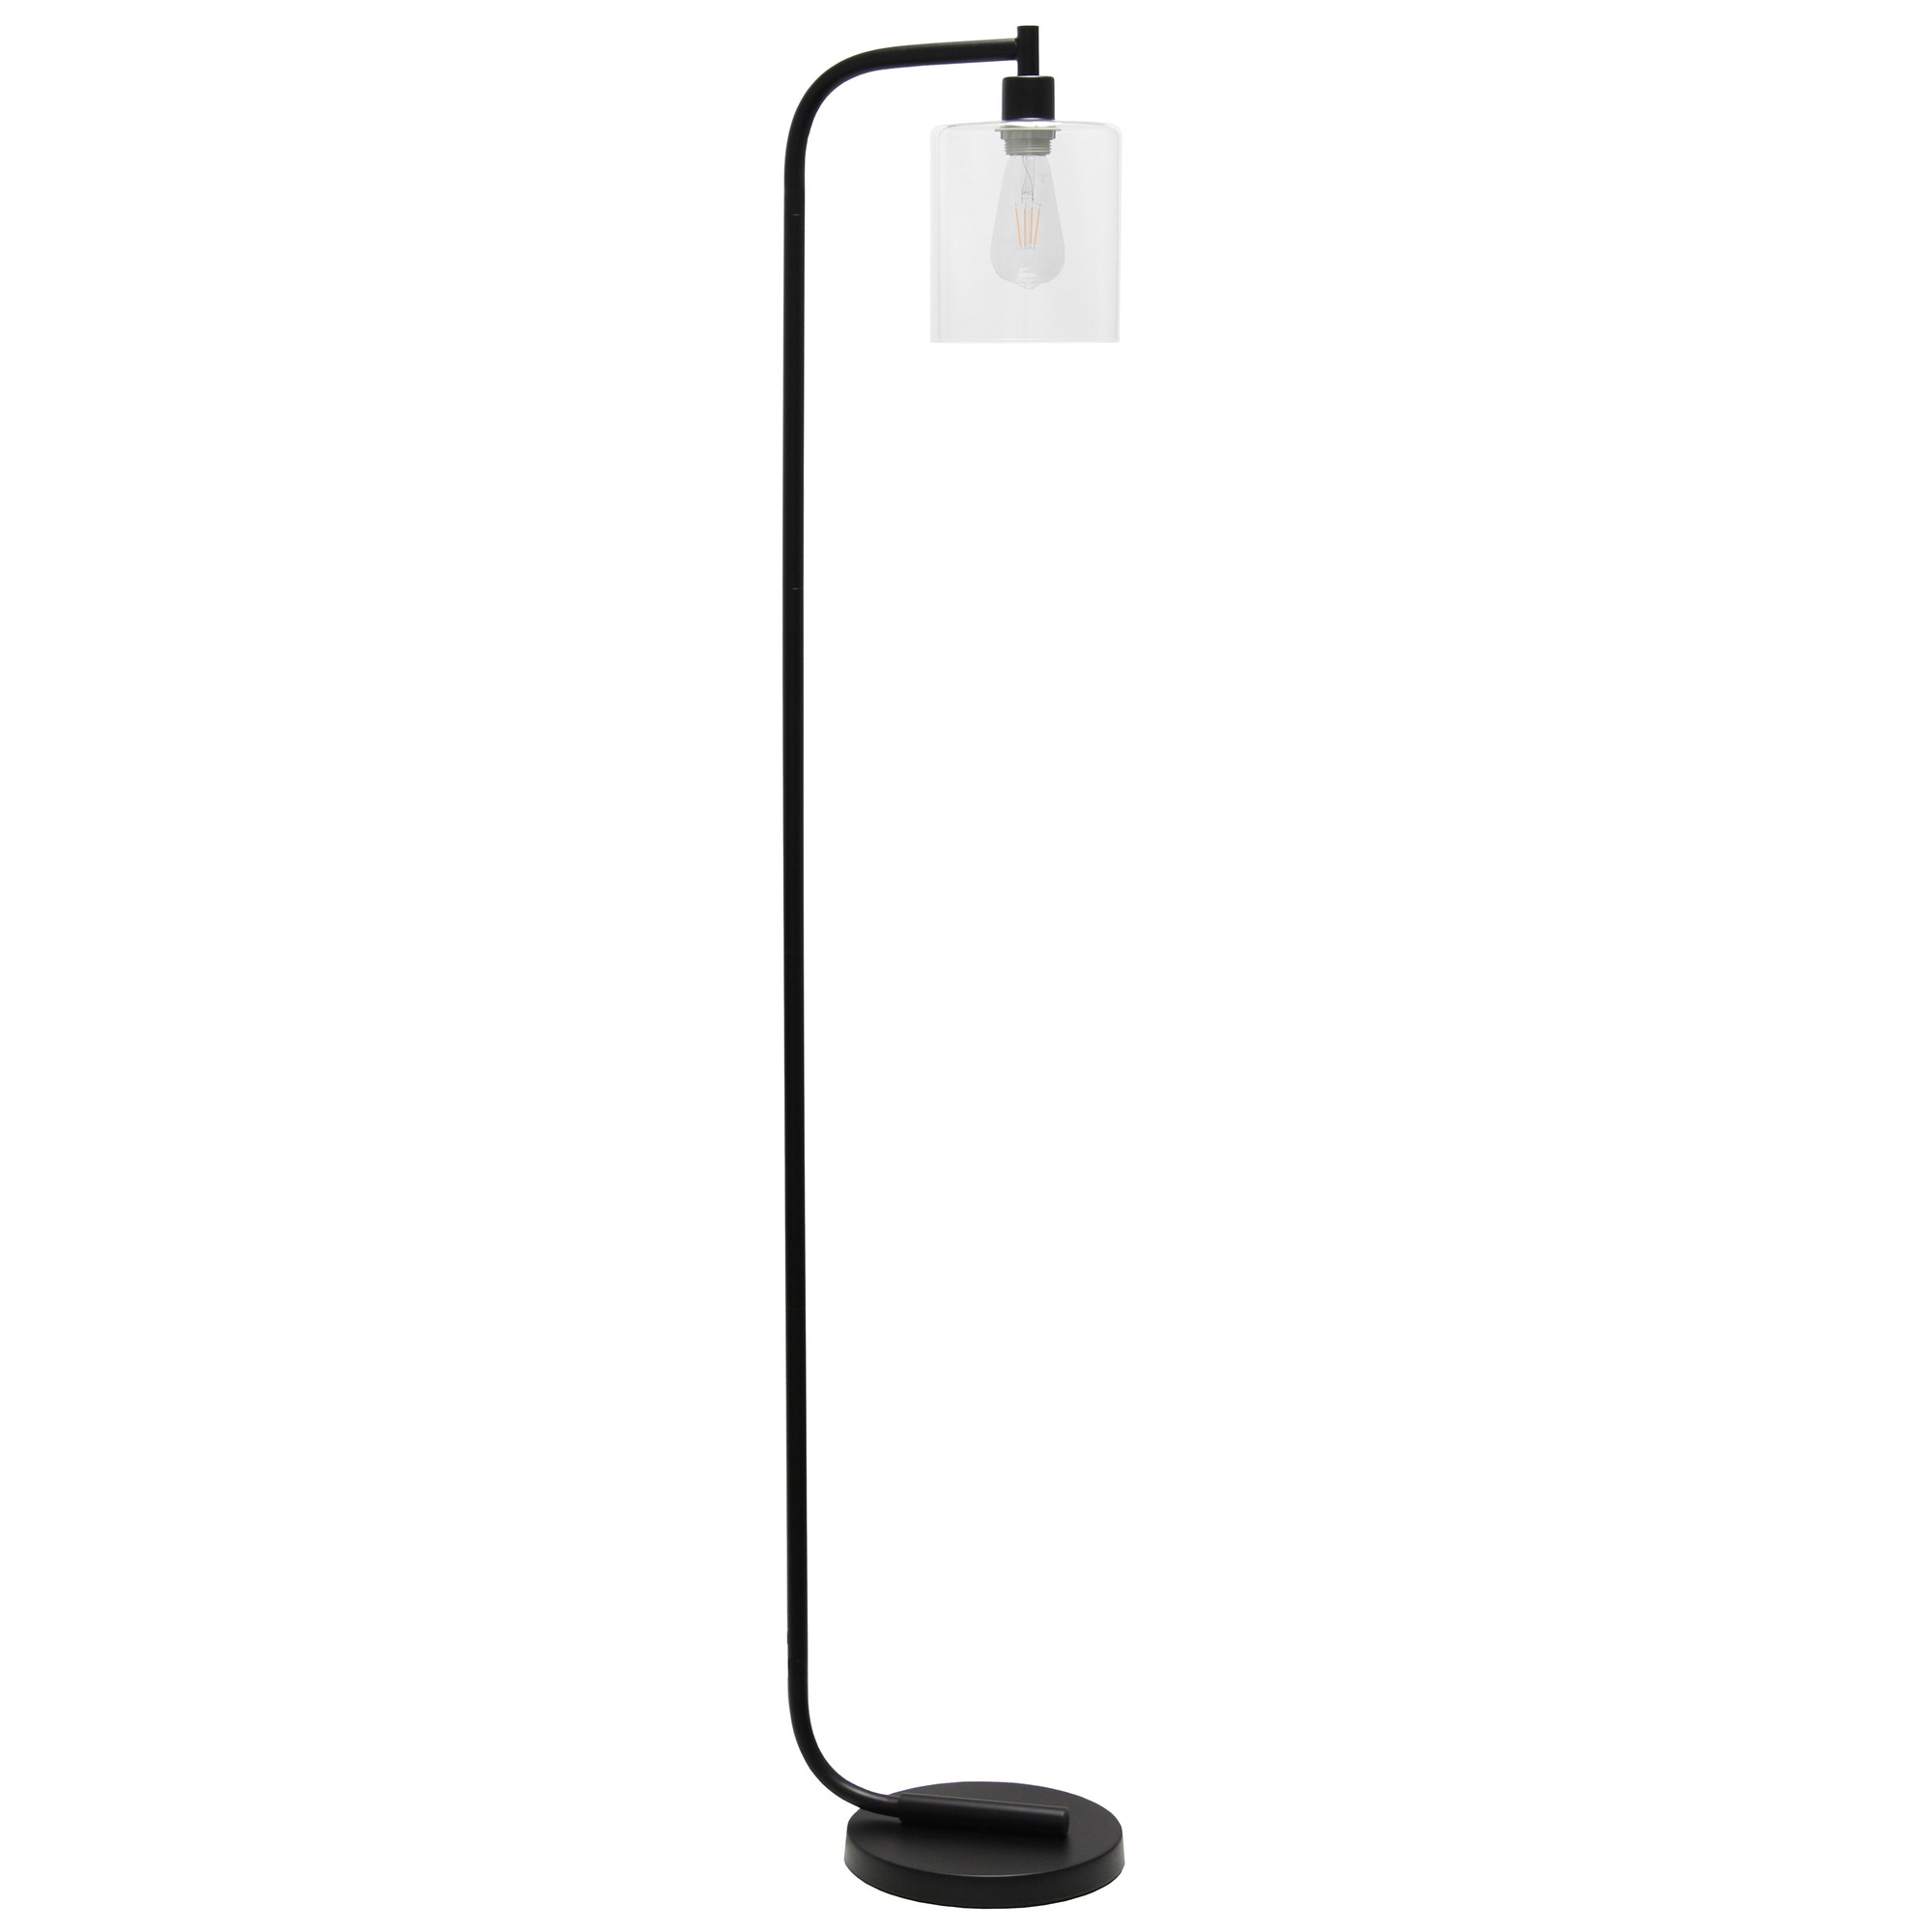 Simple Designs Antique Style Industrial Iron Lantern Floor Lamp with Glass Shade, Black